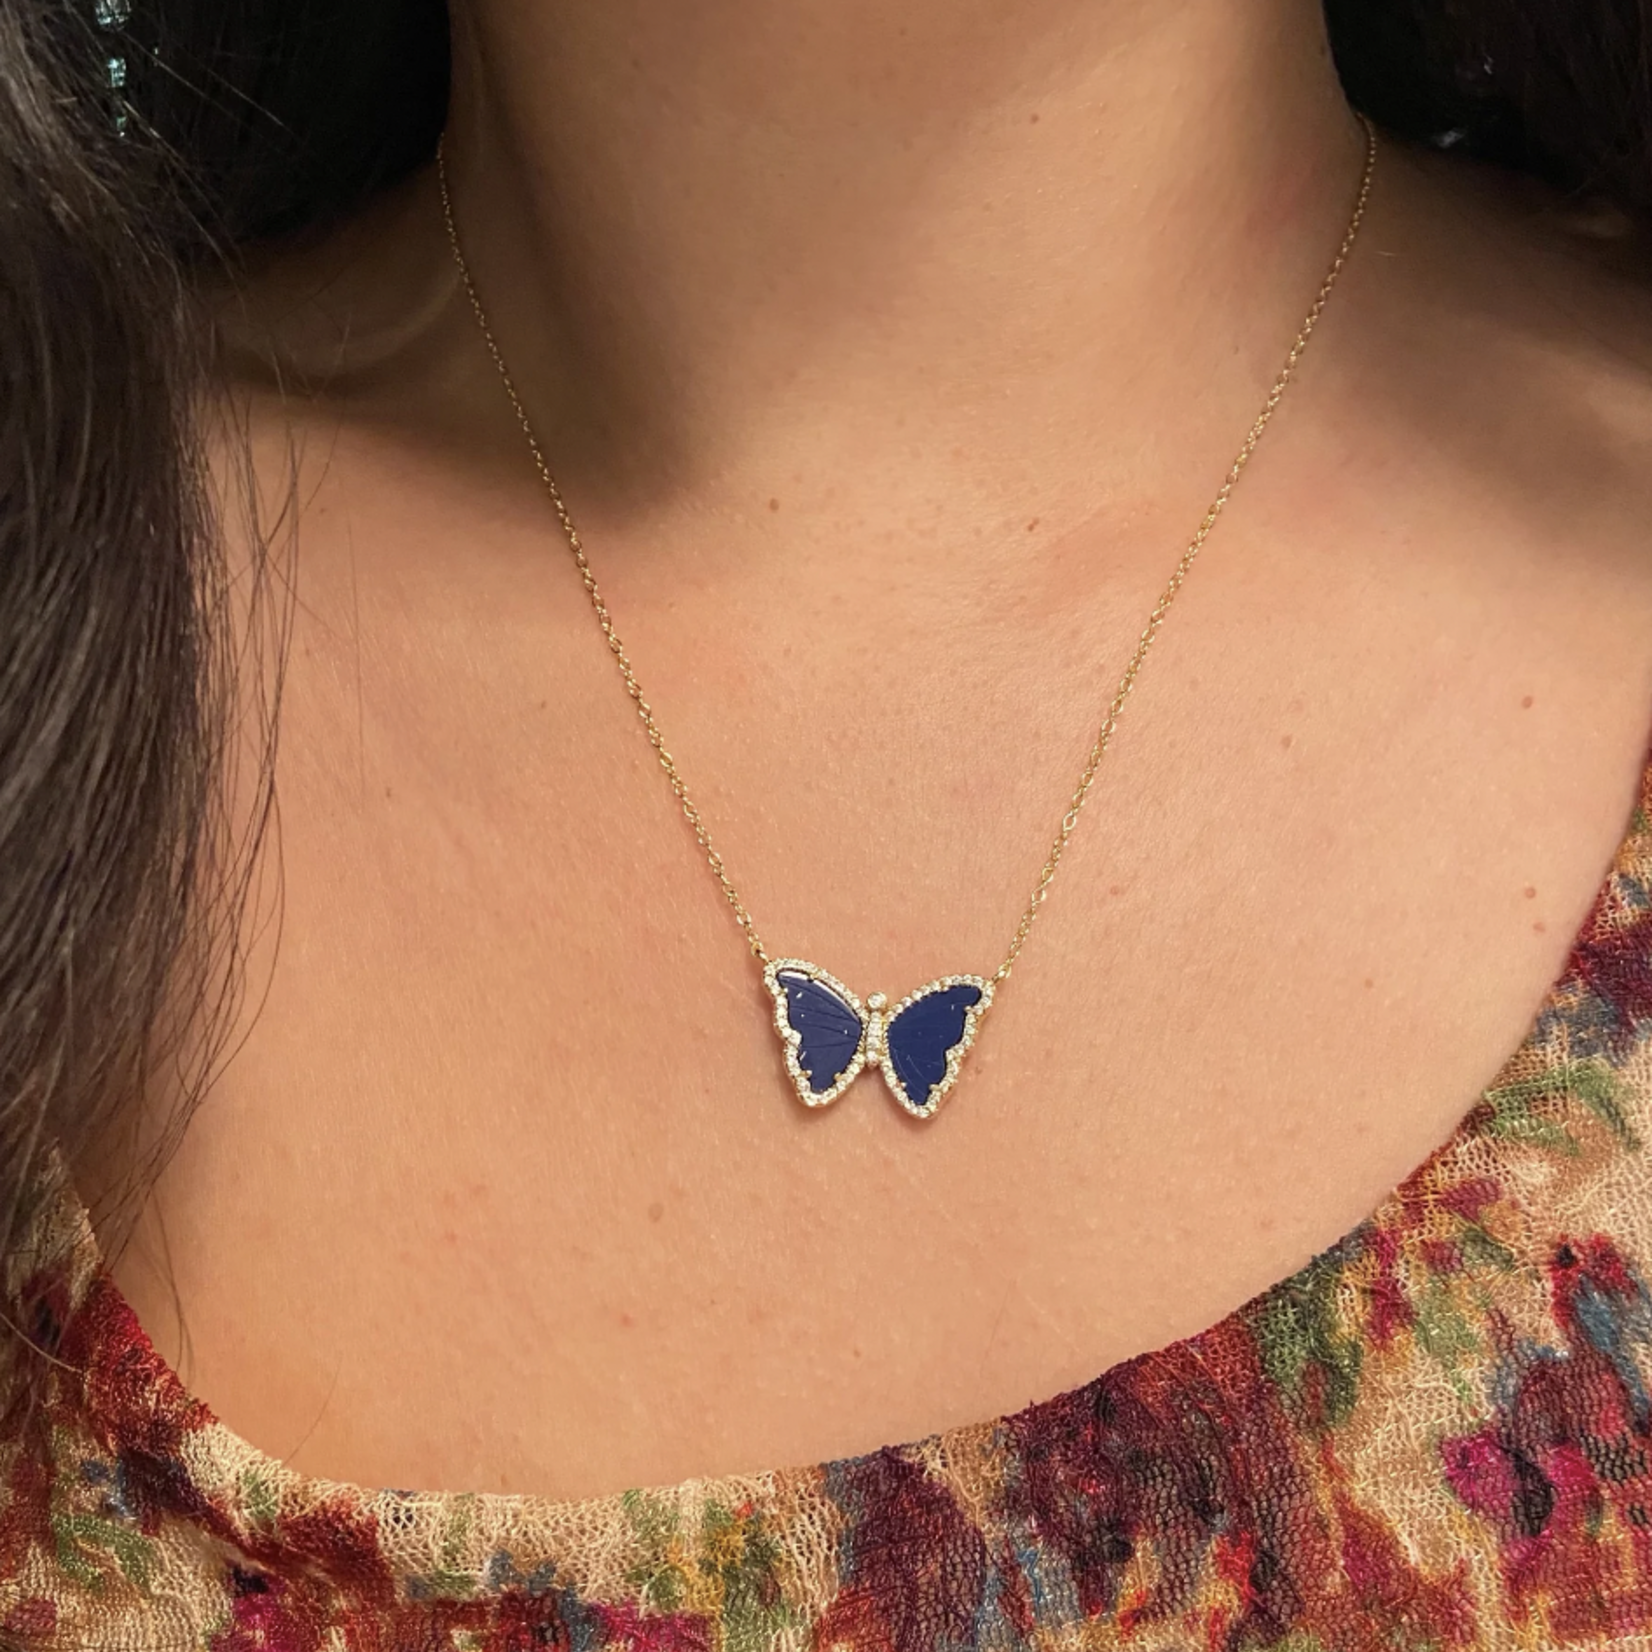 Blue Lapis Butterfly Necklace with Crystals - Gold